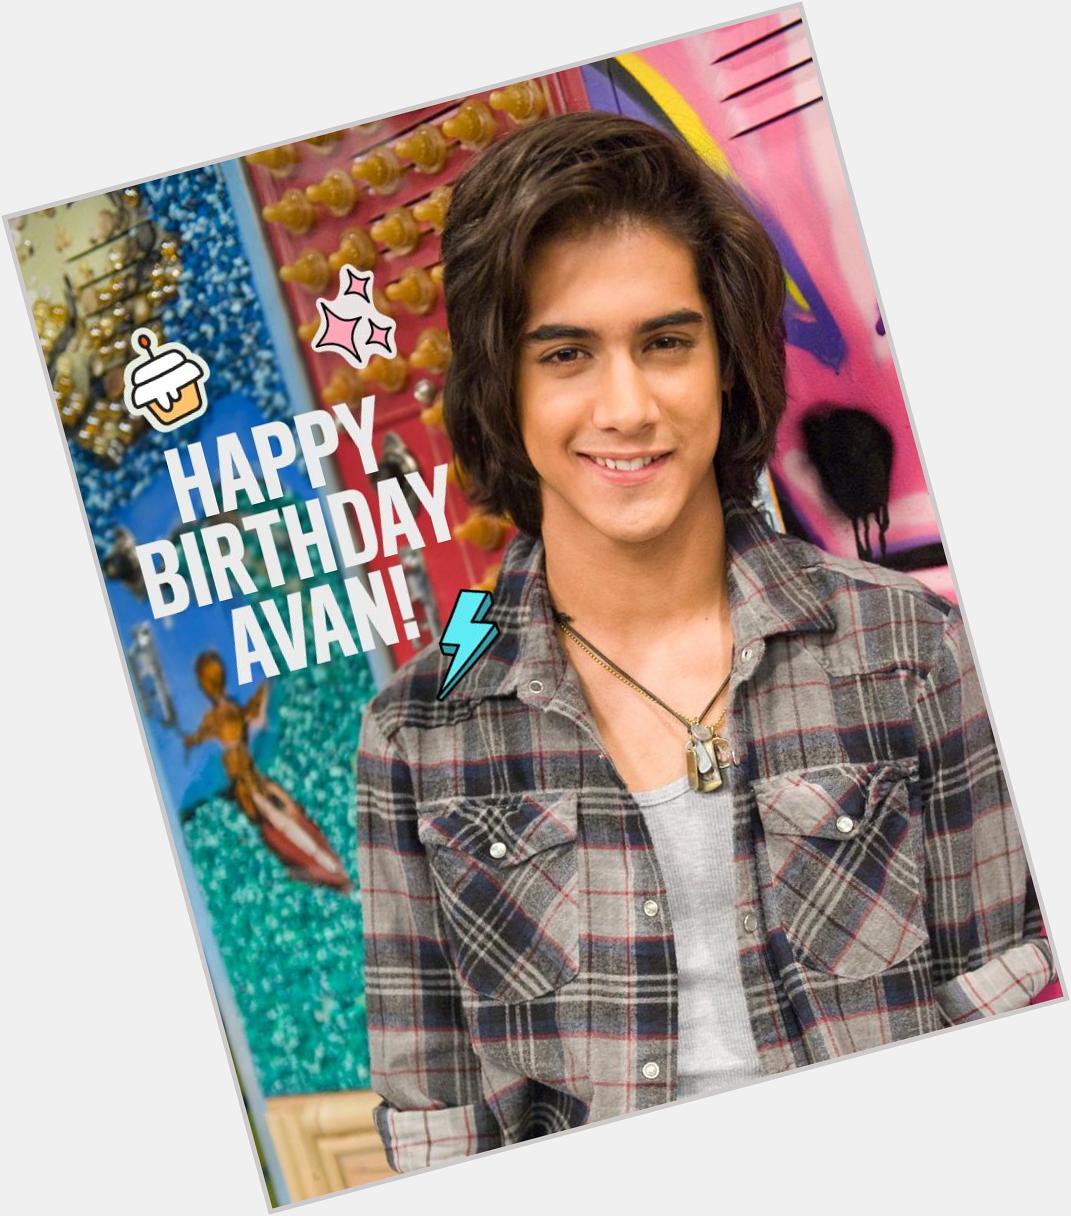 Wishing a happy birthday to the one and only  Feliz cumpleaños Avan jogia  